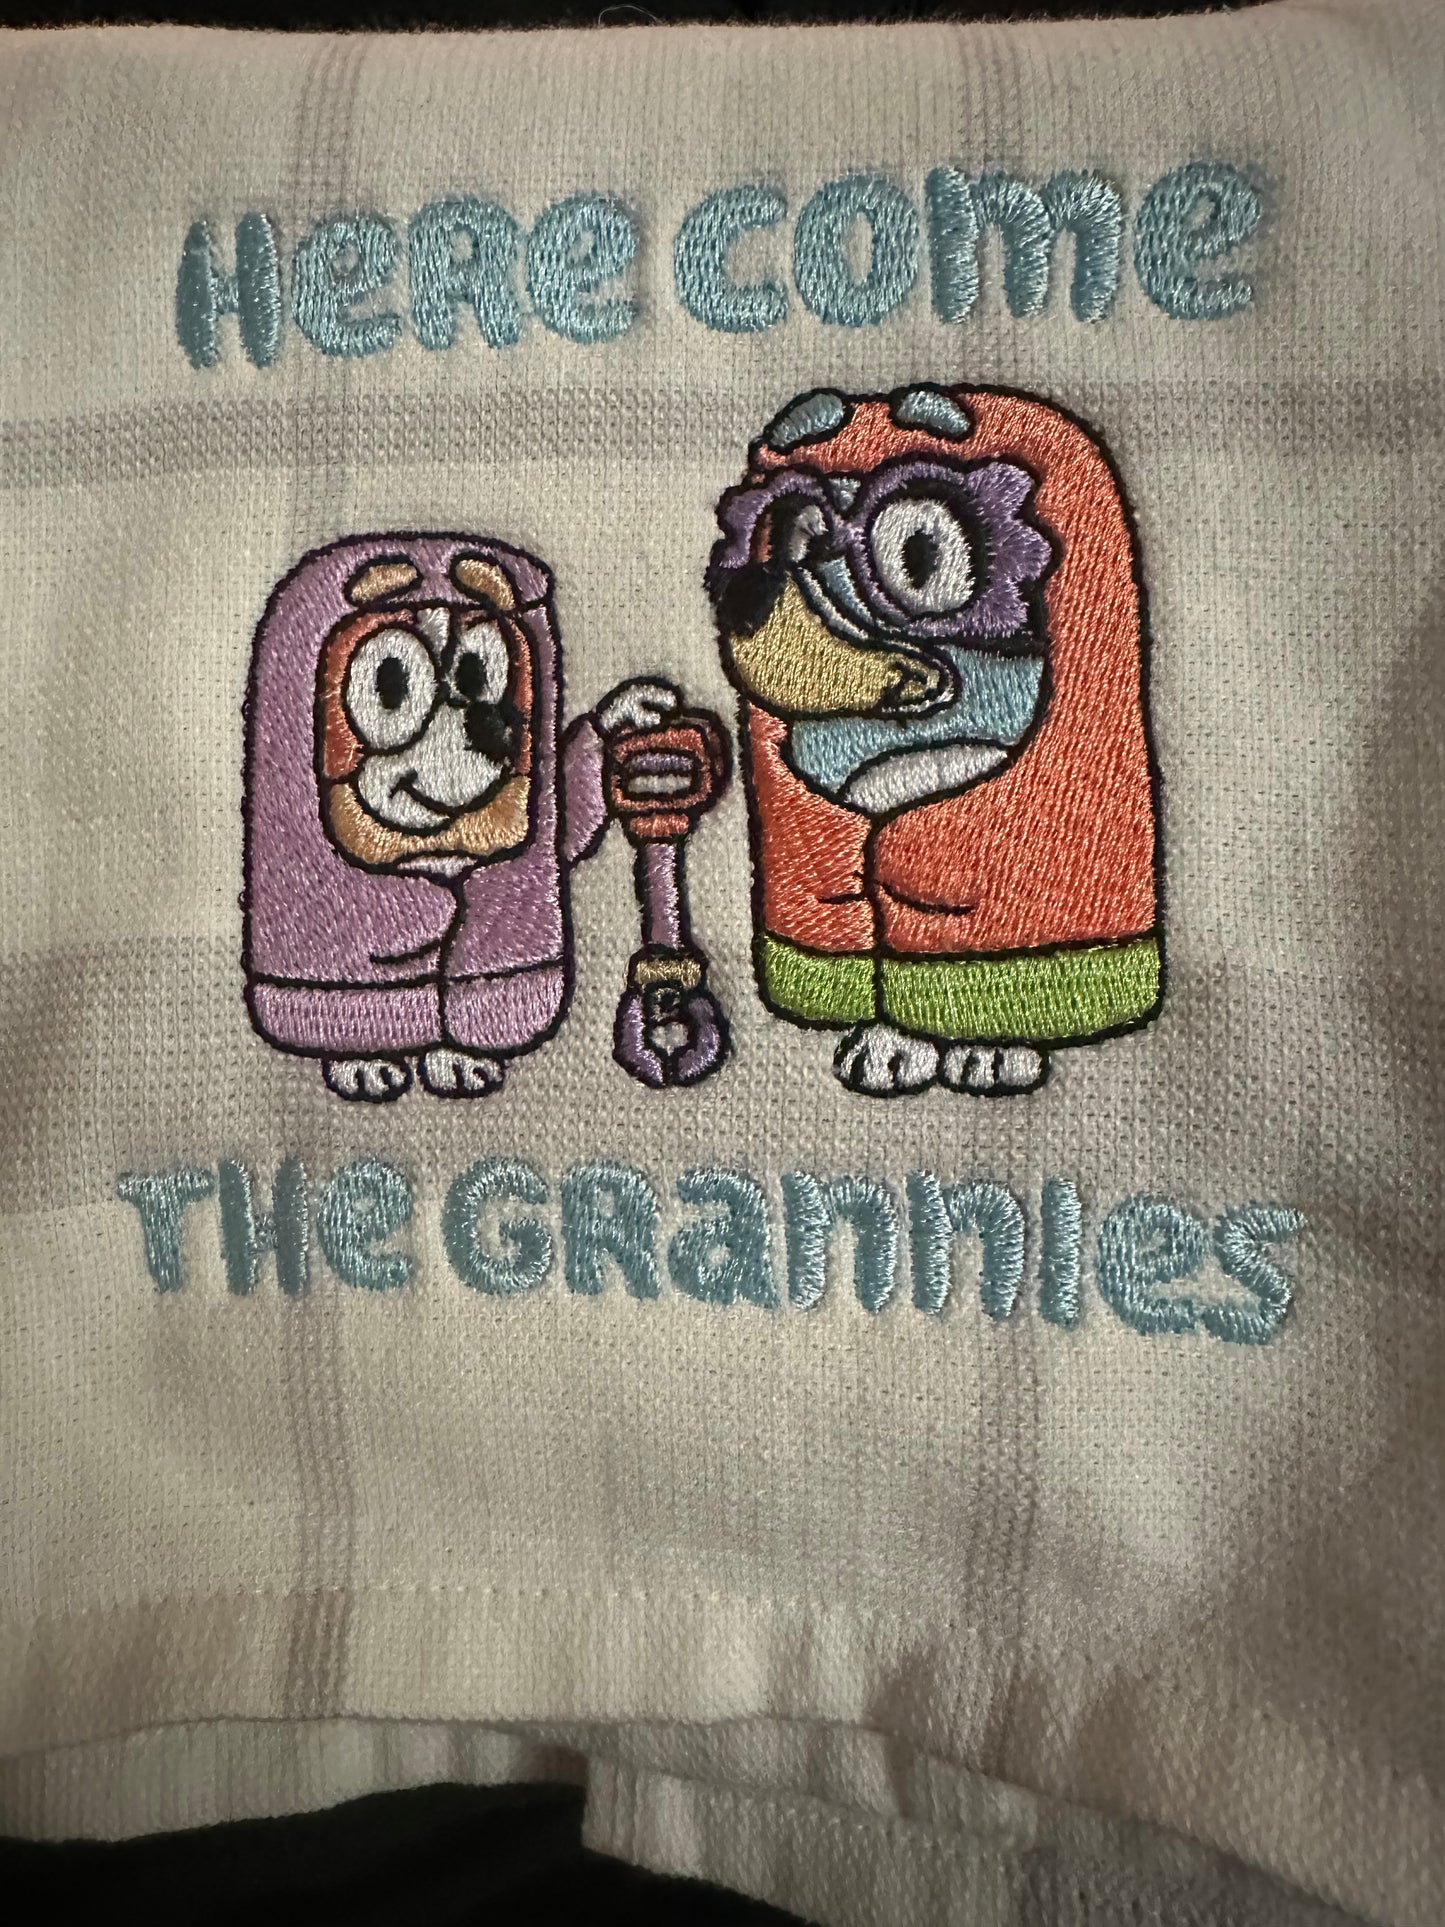 Here Come the Grannies Hand Towel